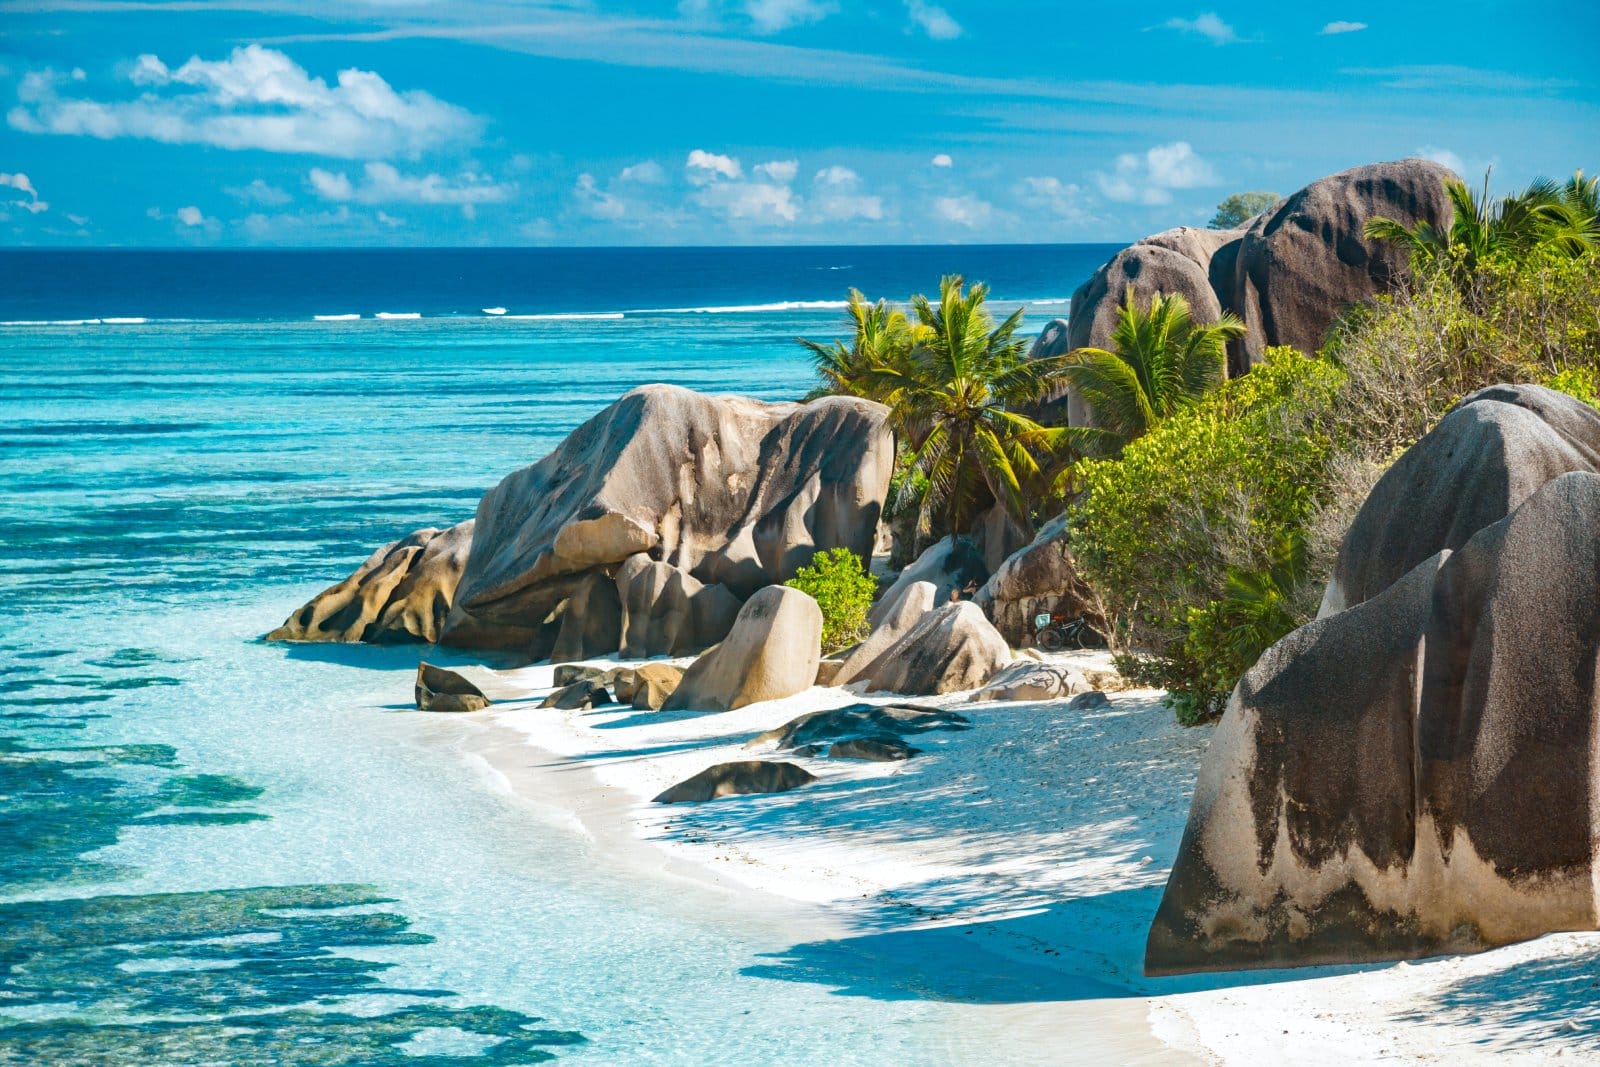 <p class="wp-caption-text">Image Credit: Shutterstock / Jakub Barzycki</p>  <p><span>Located in the Indian Ocean, the Seychelles archipelago is a paradise for sailors seeking exotic landscapes and an escape into nature. This group of 115 islands offers an array of sailing experiences, from easy, sheltered passages within the inner islands to more challenging open-ocean adventures among the outer atolls. The Seychelles are renowned for their stunning natural beauty, including crystal-clear waters, coral reefs teeming with marine life, and secluded beaches fringed by palm trees. The islands also boast a unique biodiversity, with several UNESCO World Heritage Sites.</span></p>